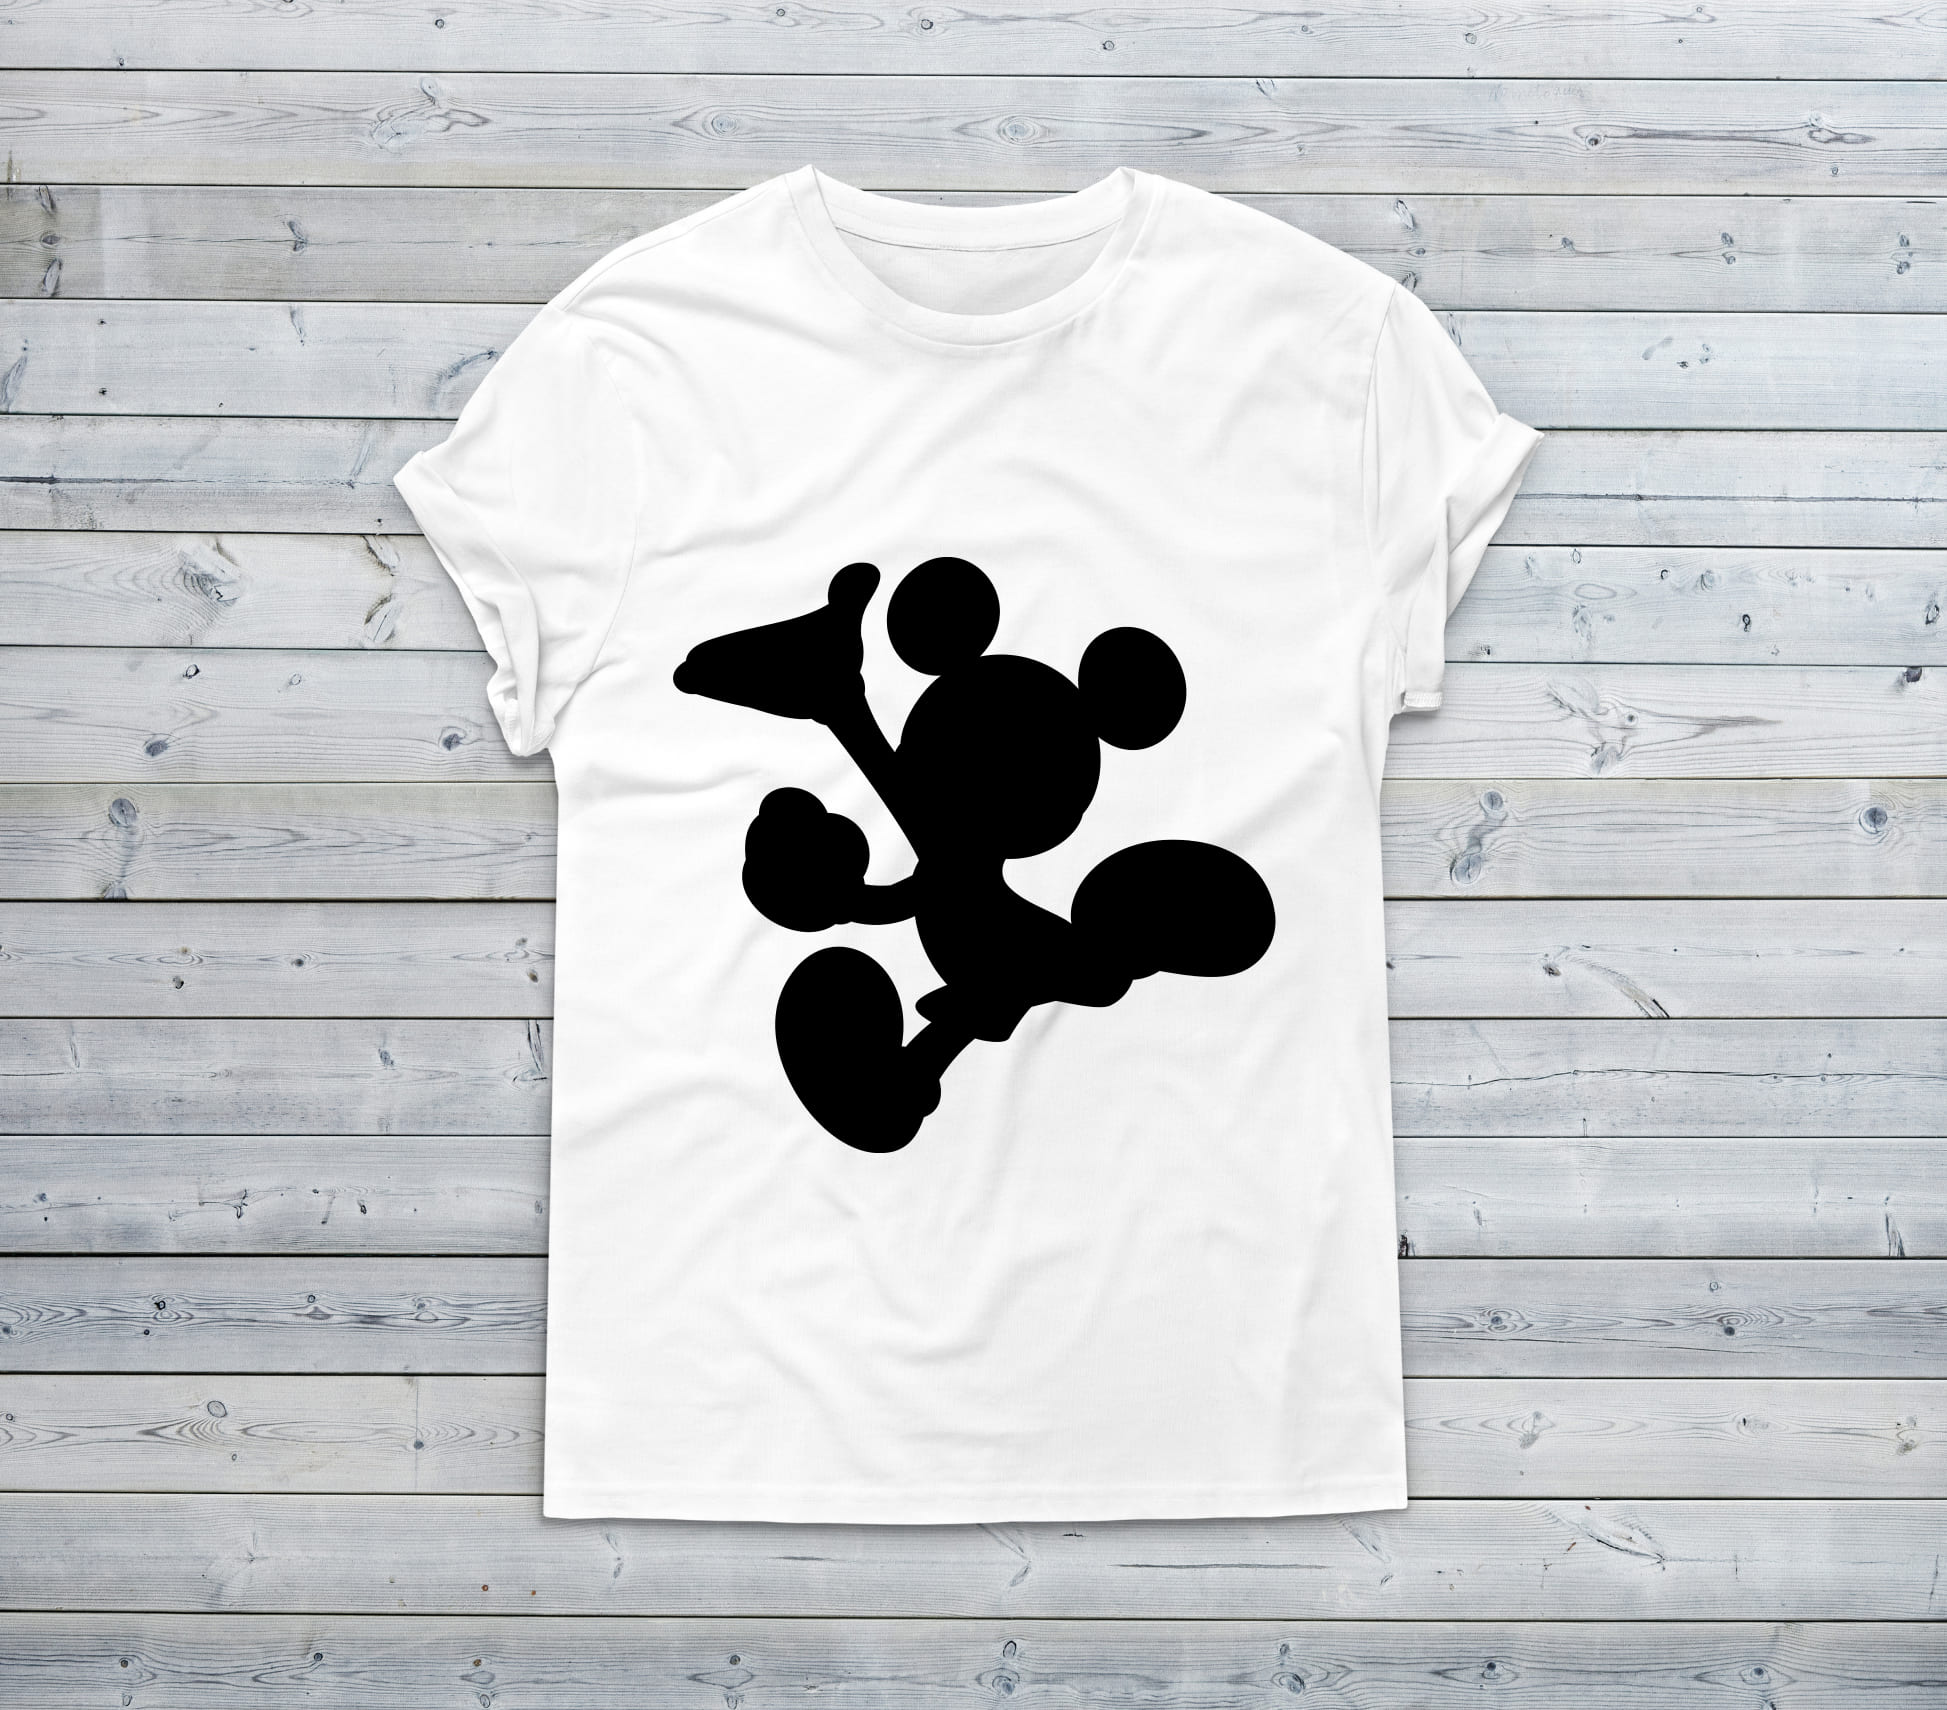 So active mickey mouse for your t-shirt.